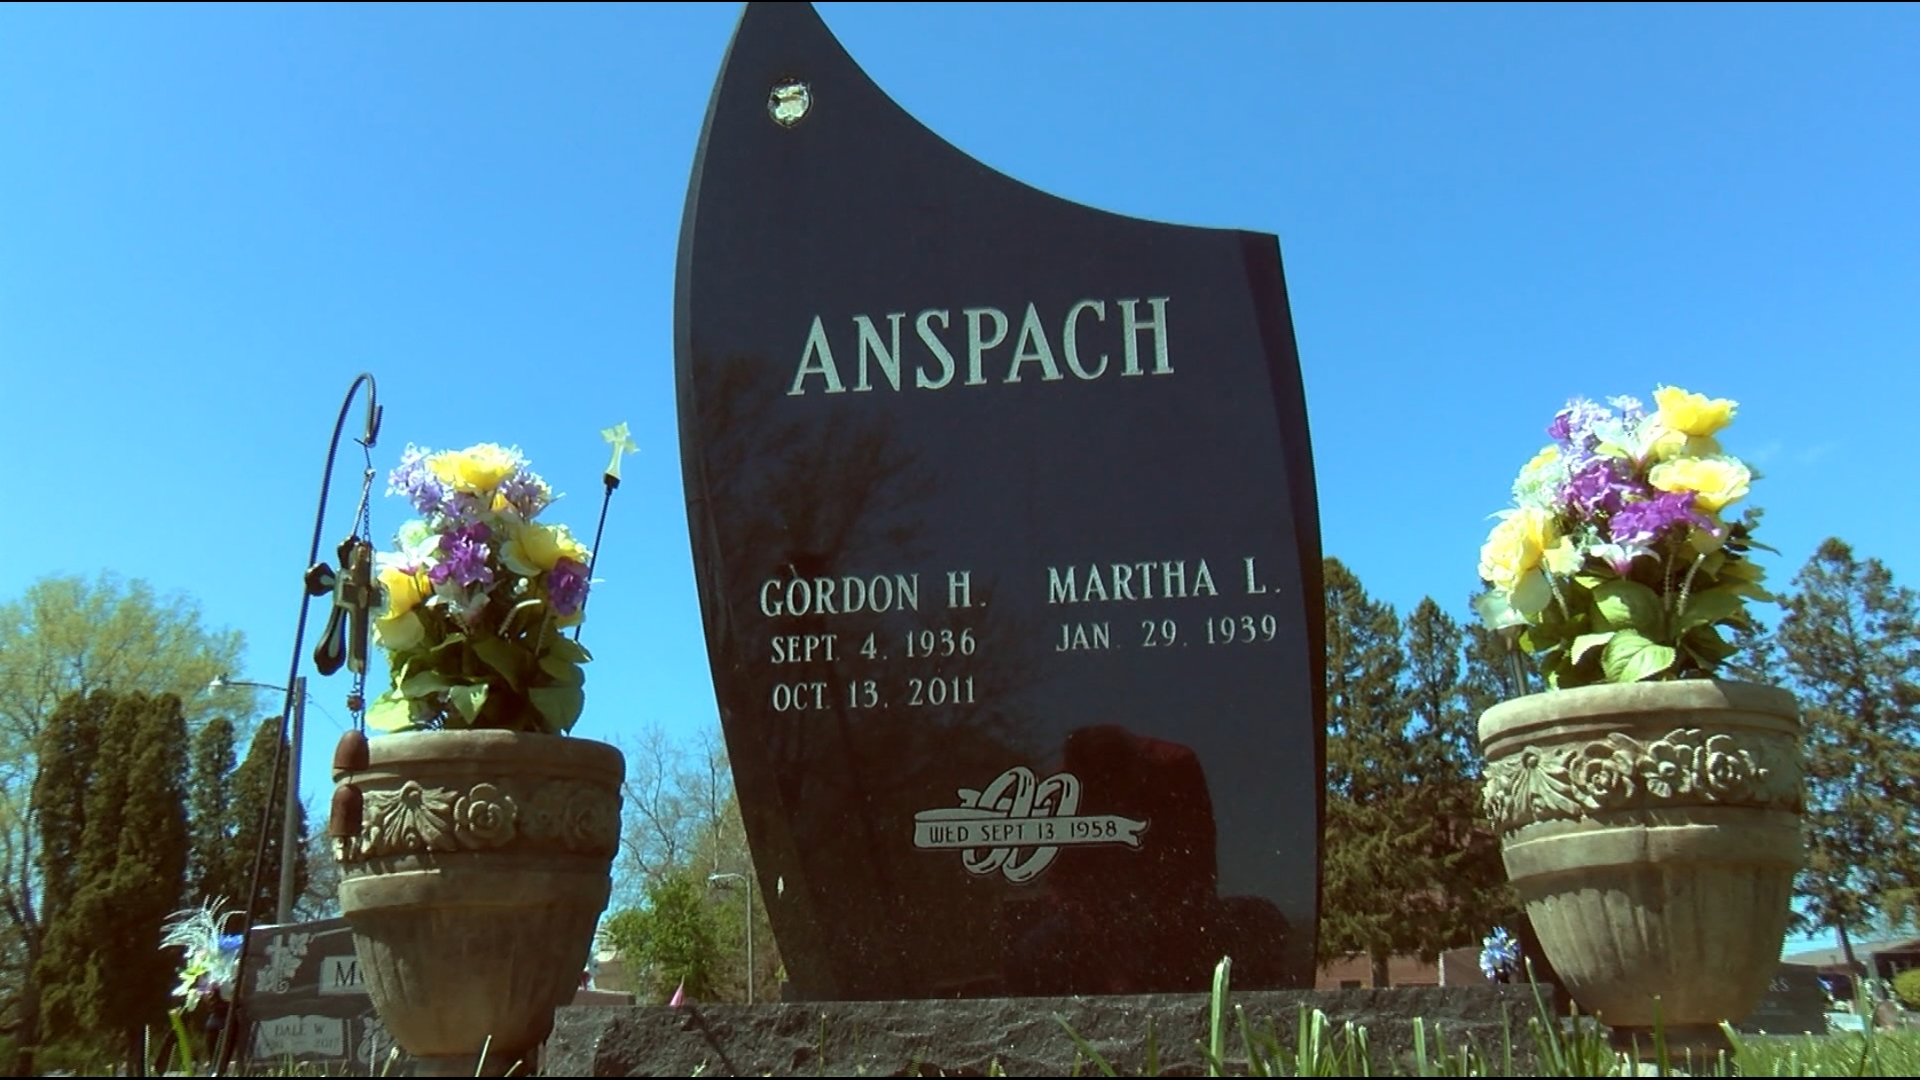 Police in Columbia City, Indiana are searching for whoever stole a badge from the headstone of former police chief Gordon Anspach.